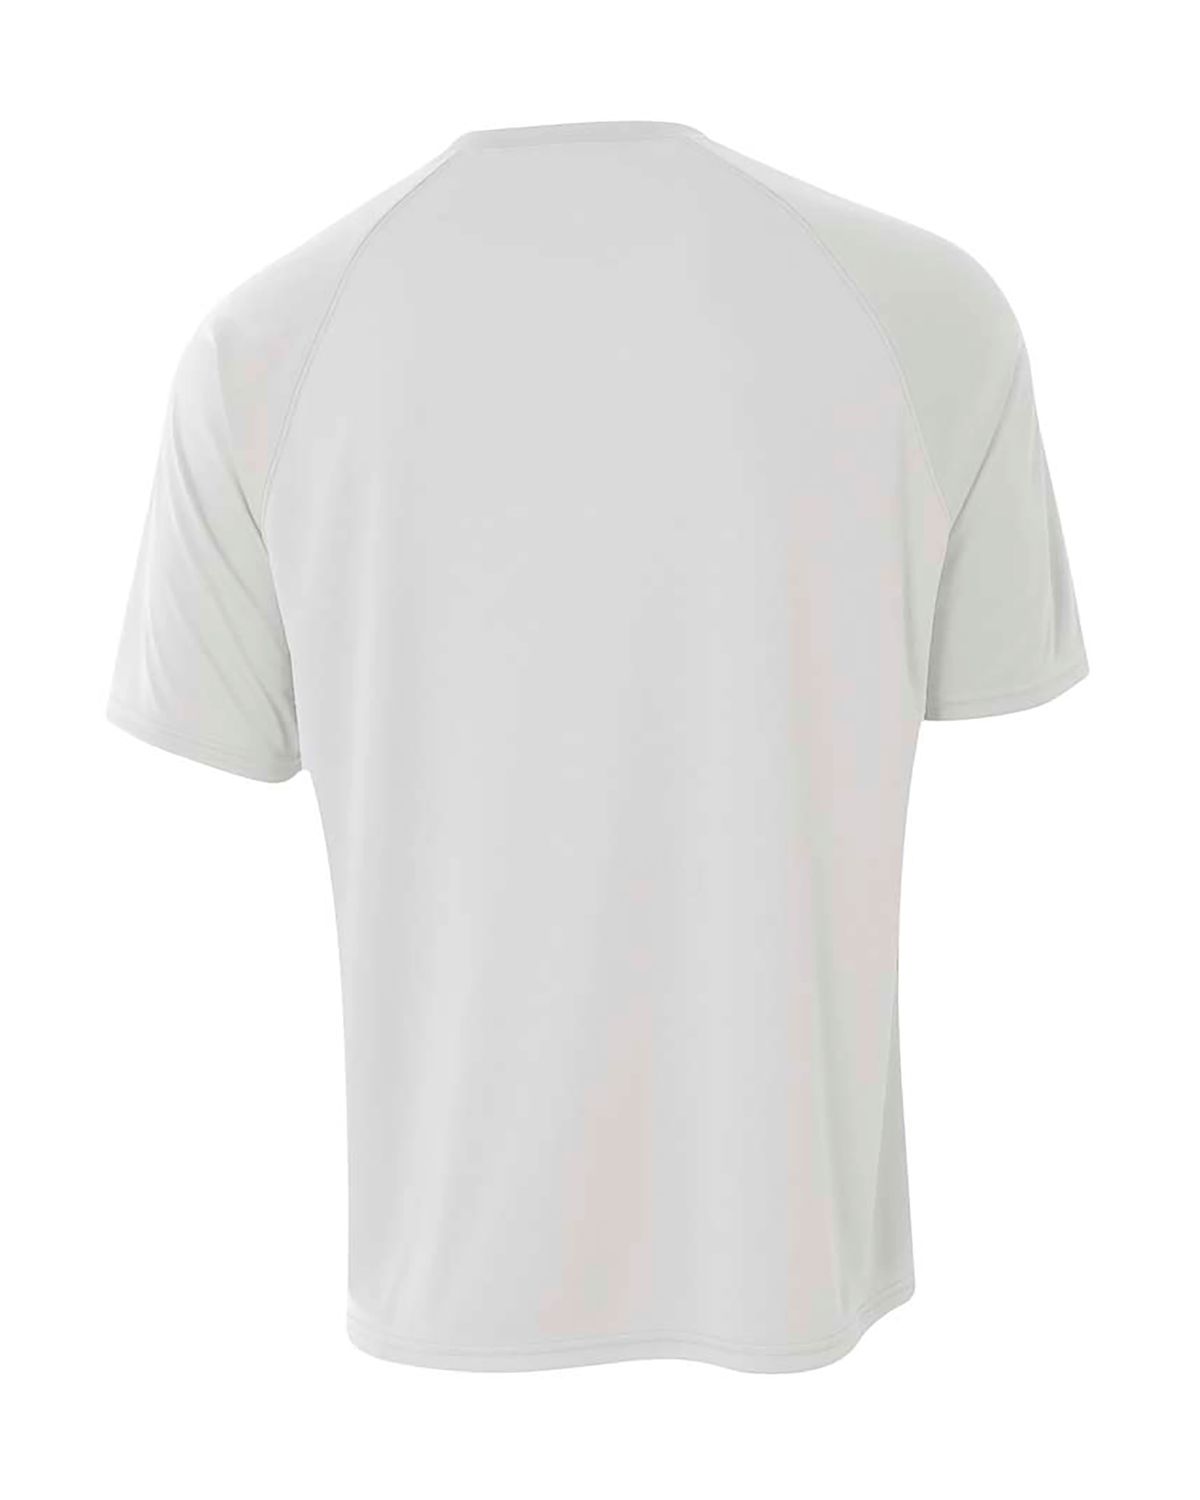 'A4 N3373 Adult Polyester V-Neck Strike Jersey with Contrast Sleeve'